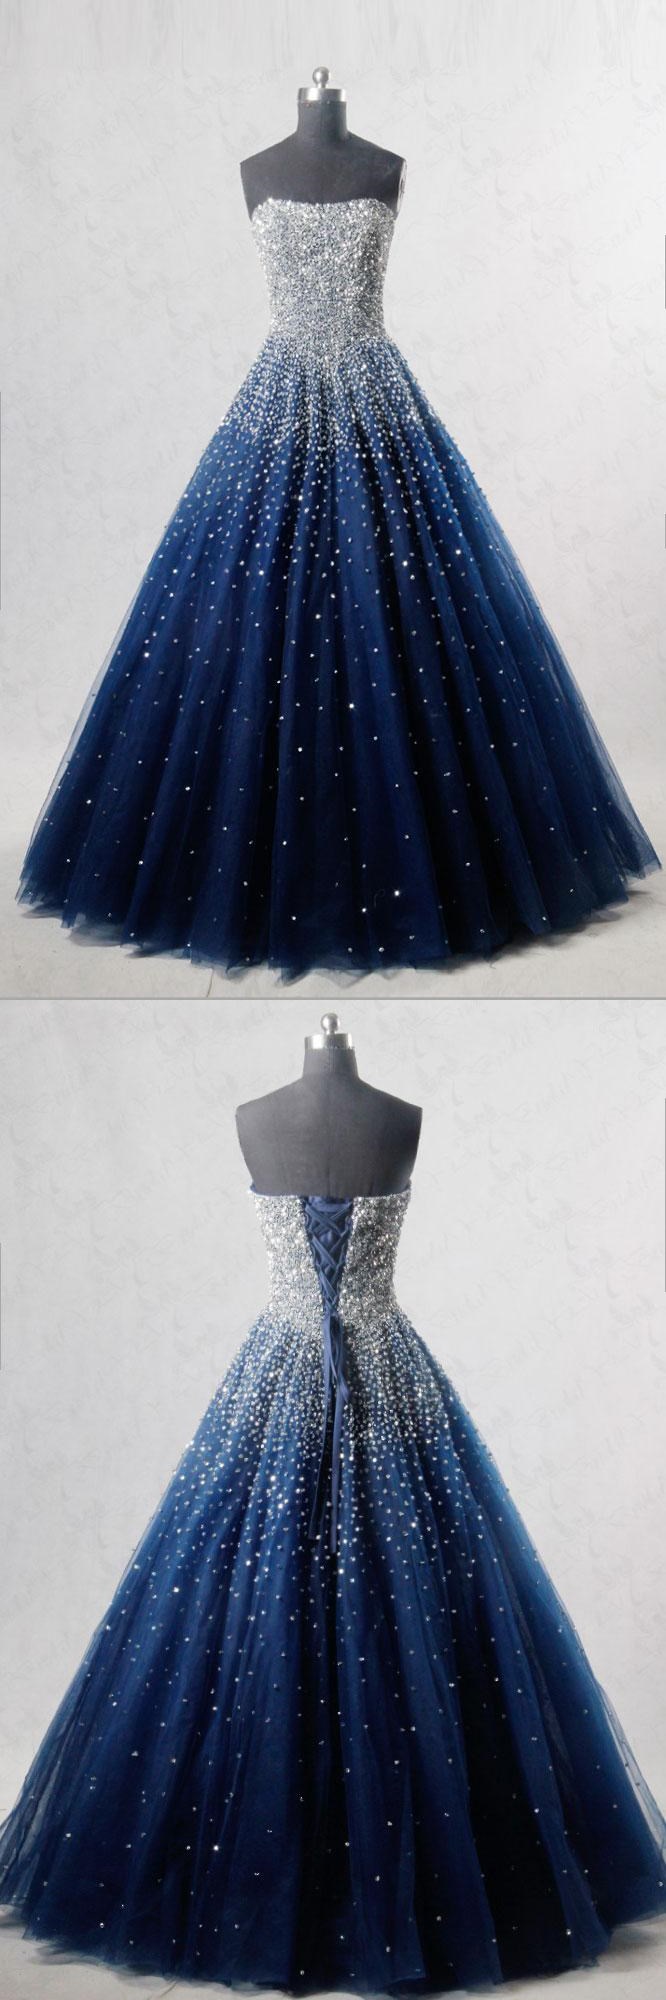 Luxury Beaded Crystal Sequin Sweet Long Prom Dress A Line Women Prom Party Gowns Floor Length Formal Evening Party Dress ,2019 Blue Beaded